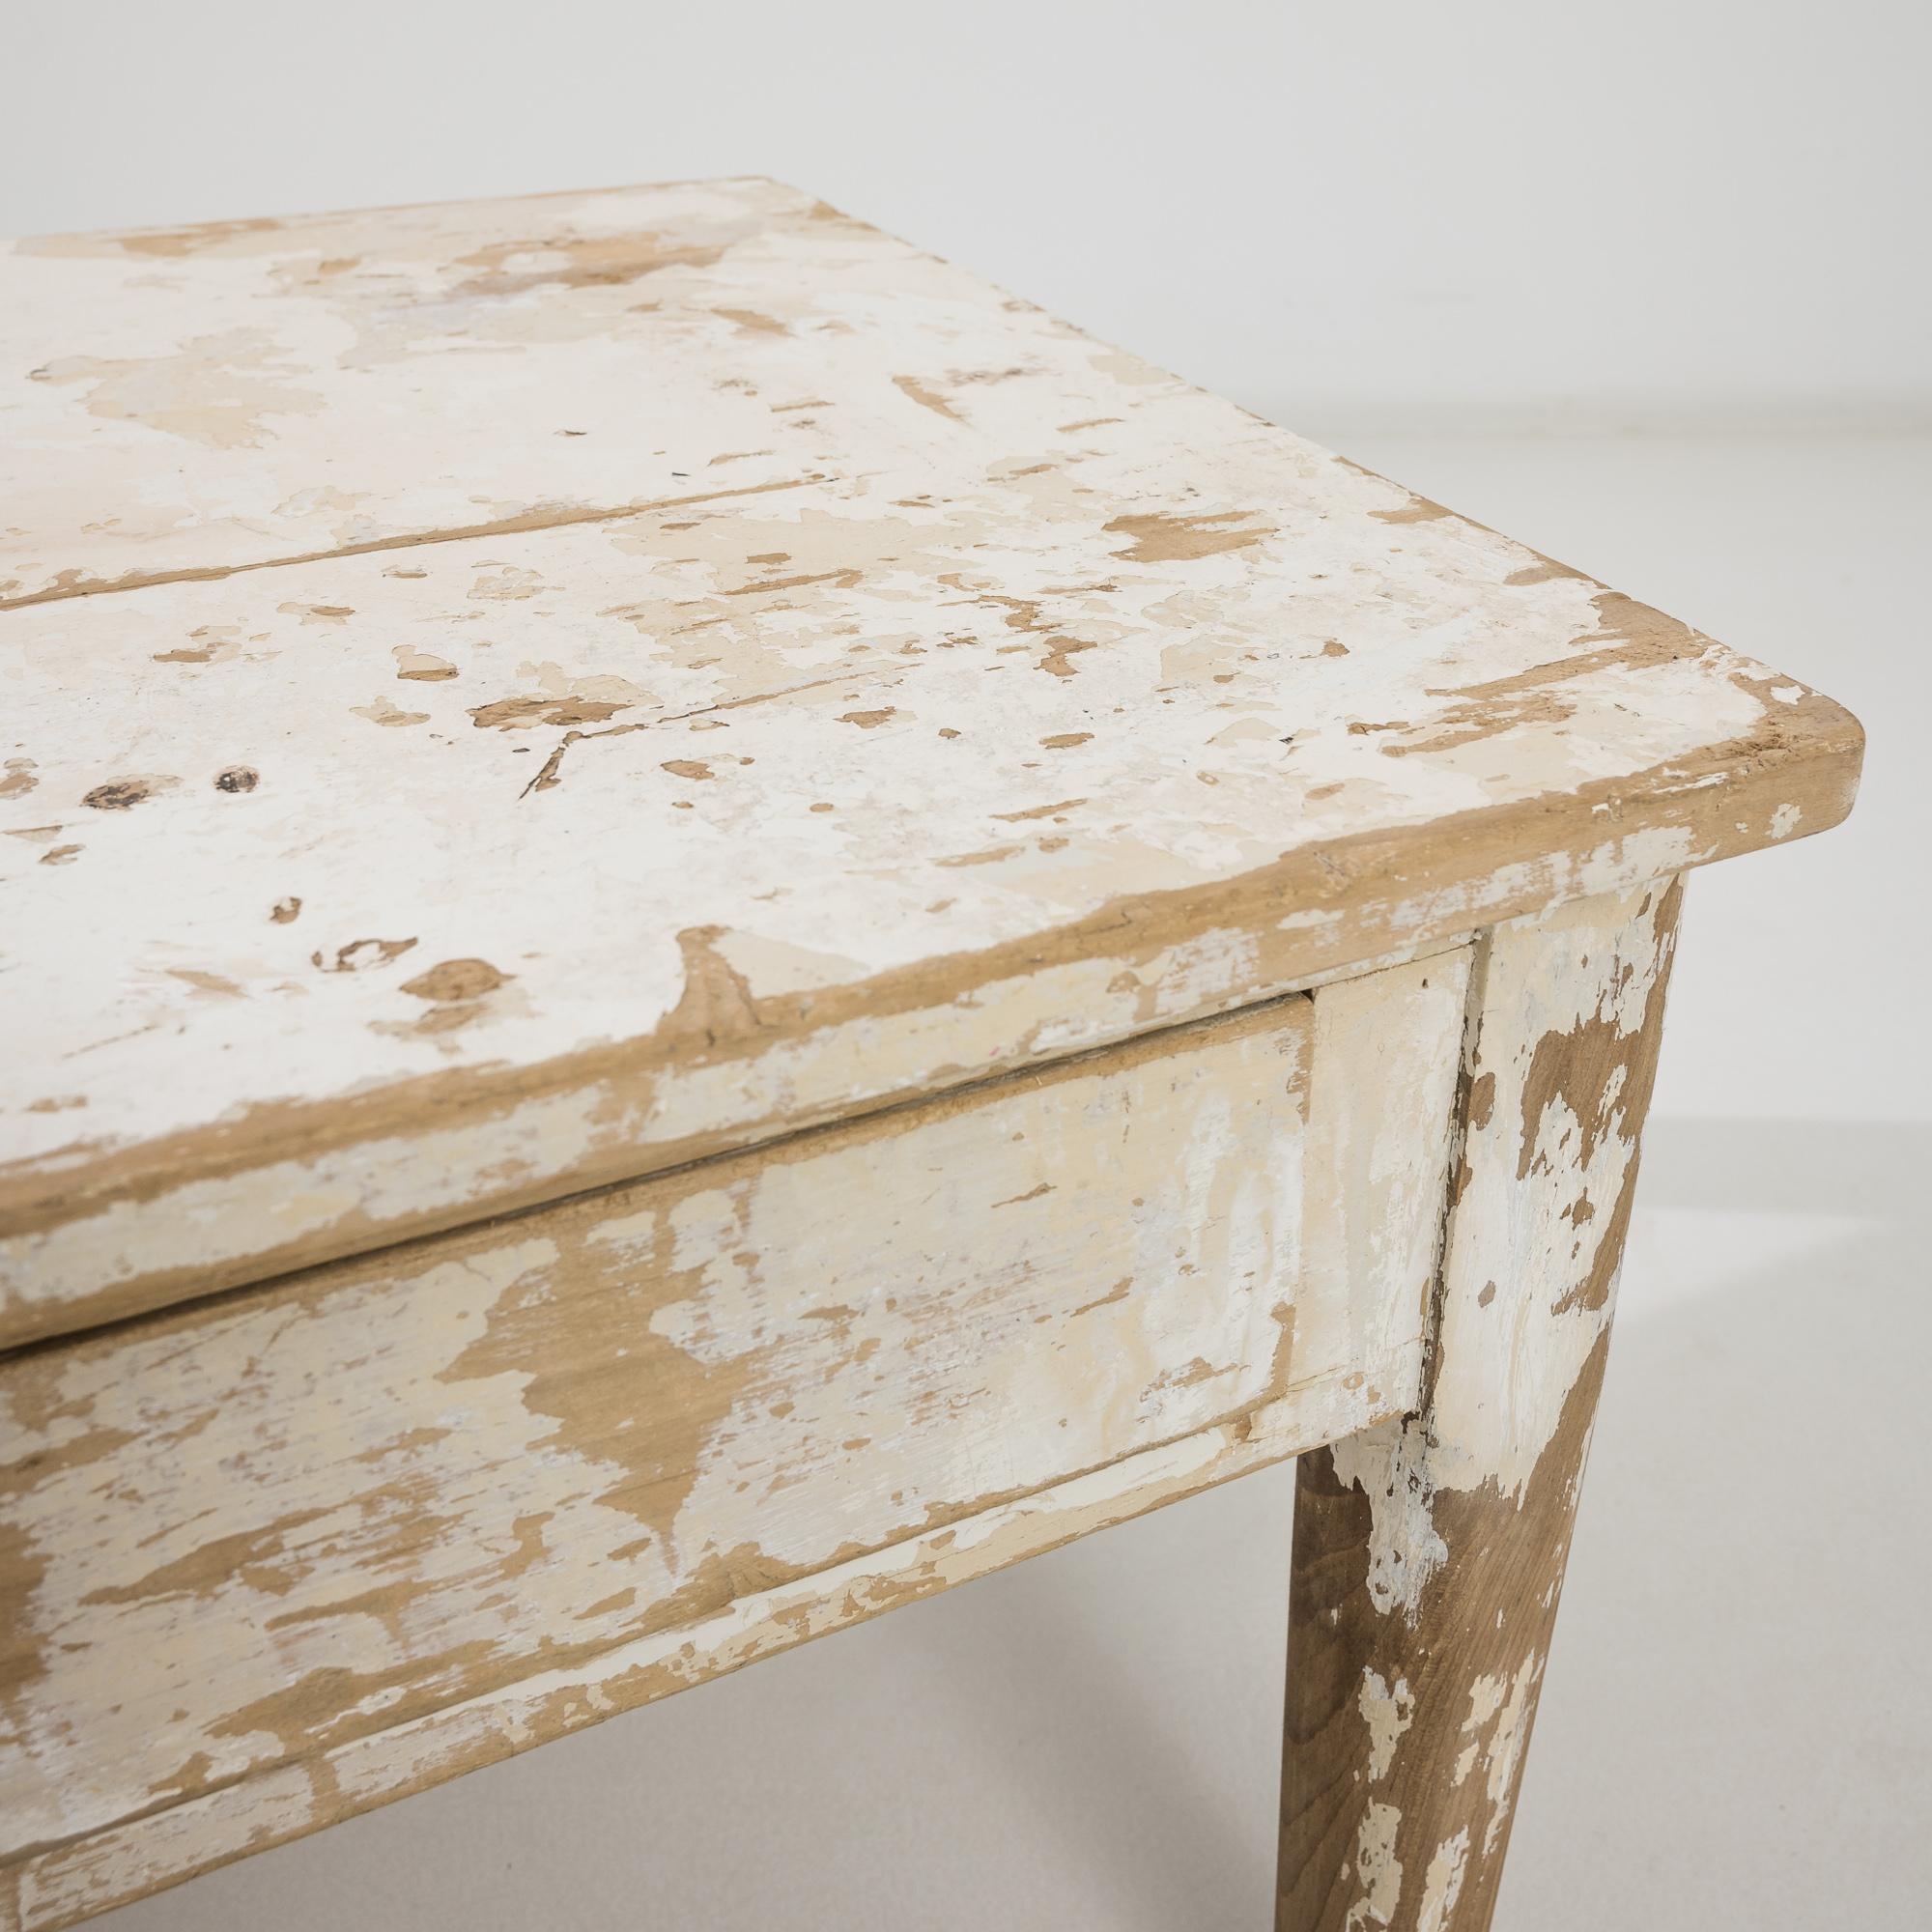 This delightful coffee table was produced in France, circa 1900. A large wooden coffee table in a rich chiffon white, provided with two practical large drawers garnished with metal cup pulls. Richly distressed, the organic patina offers a peek of